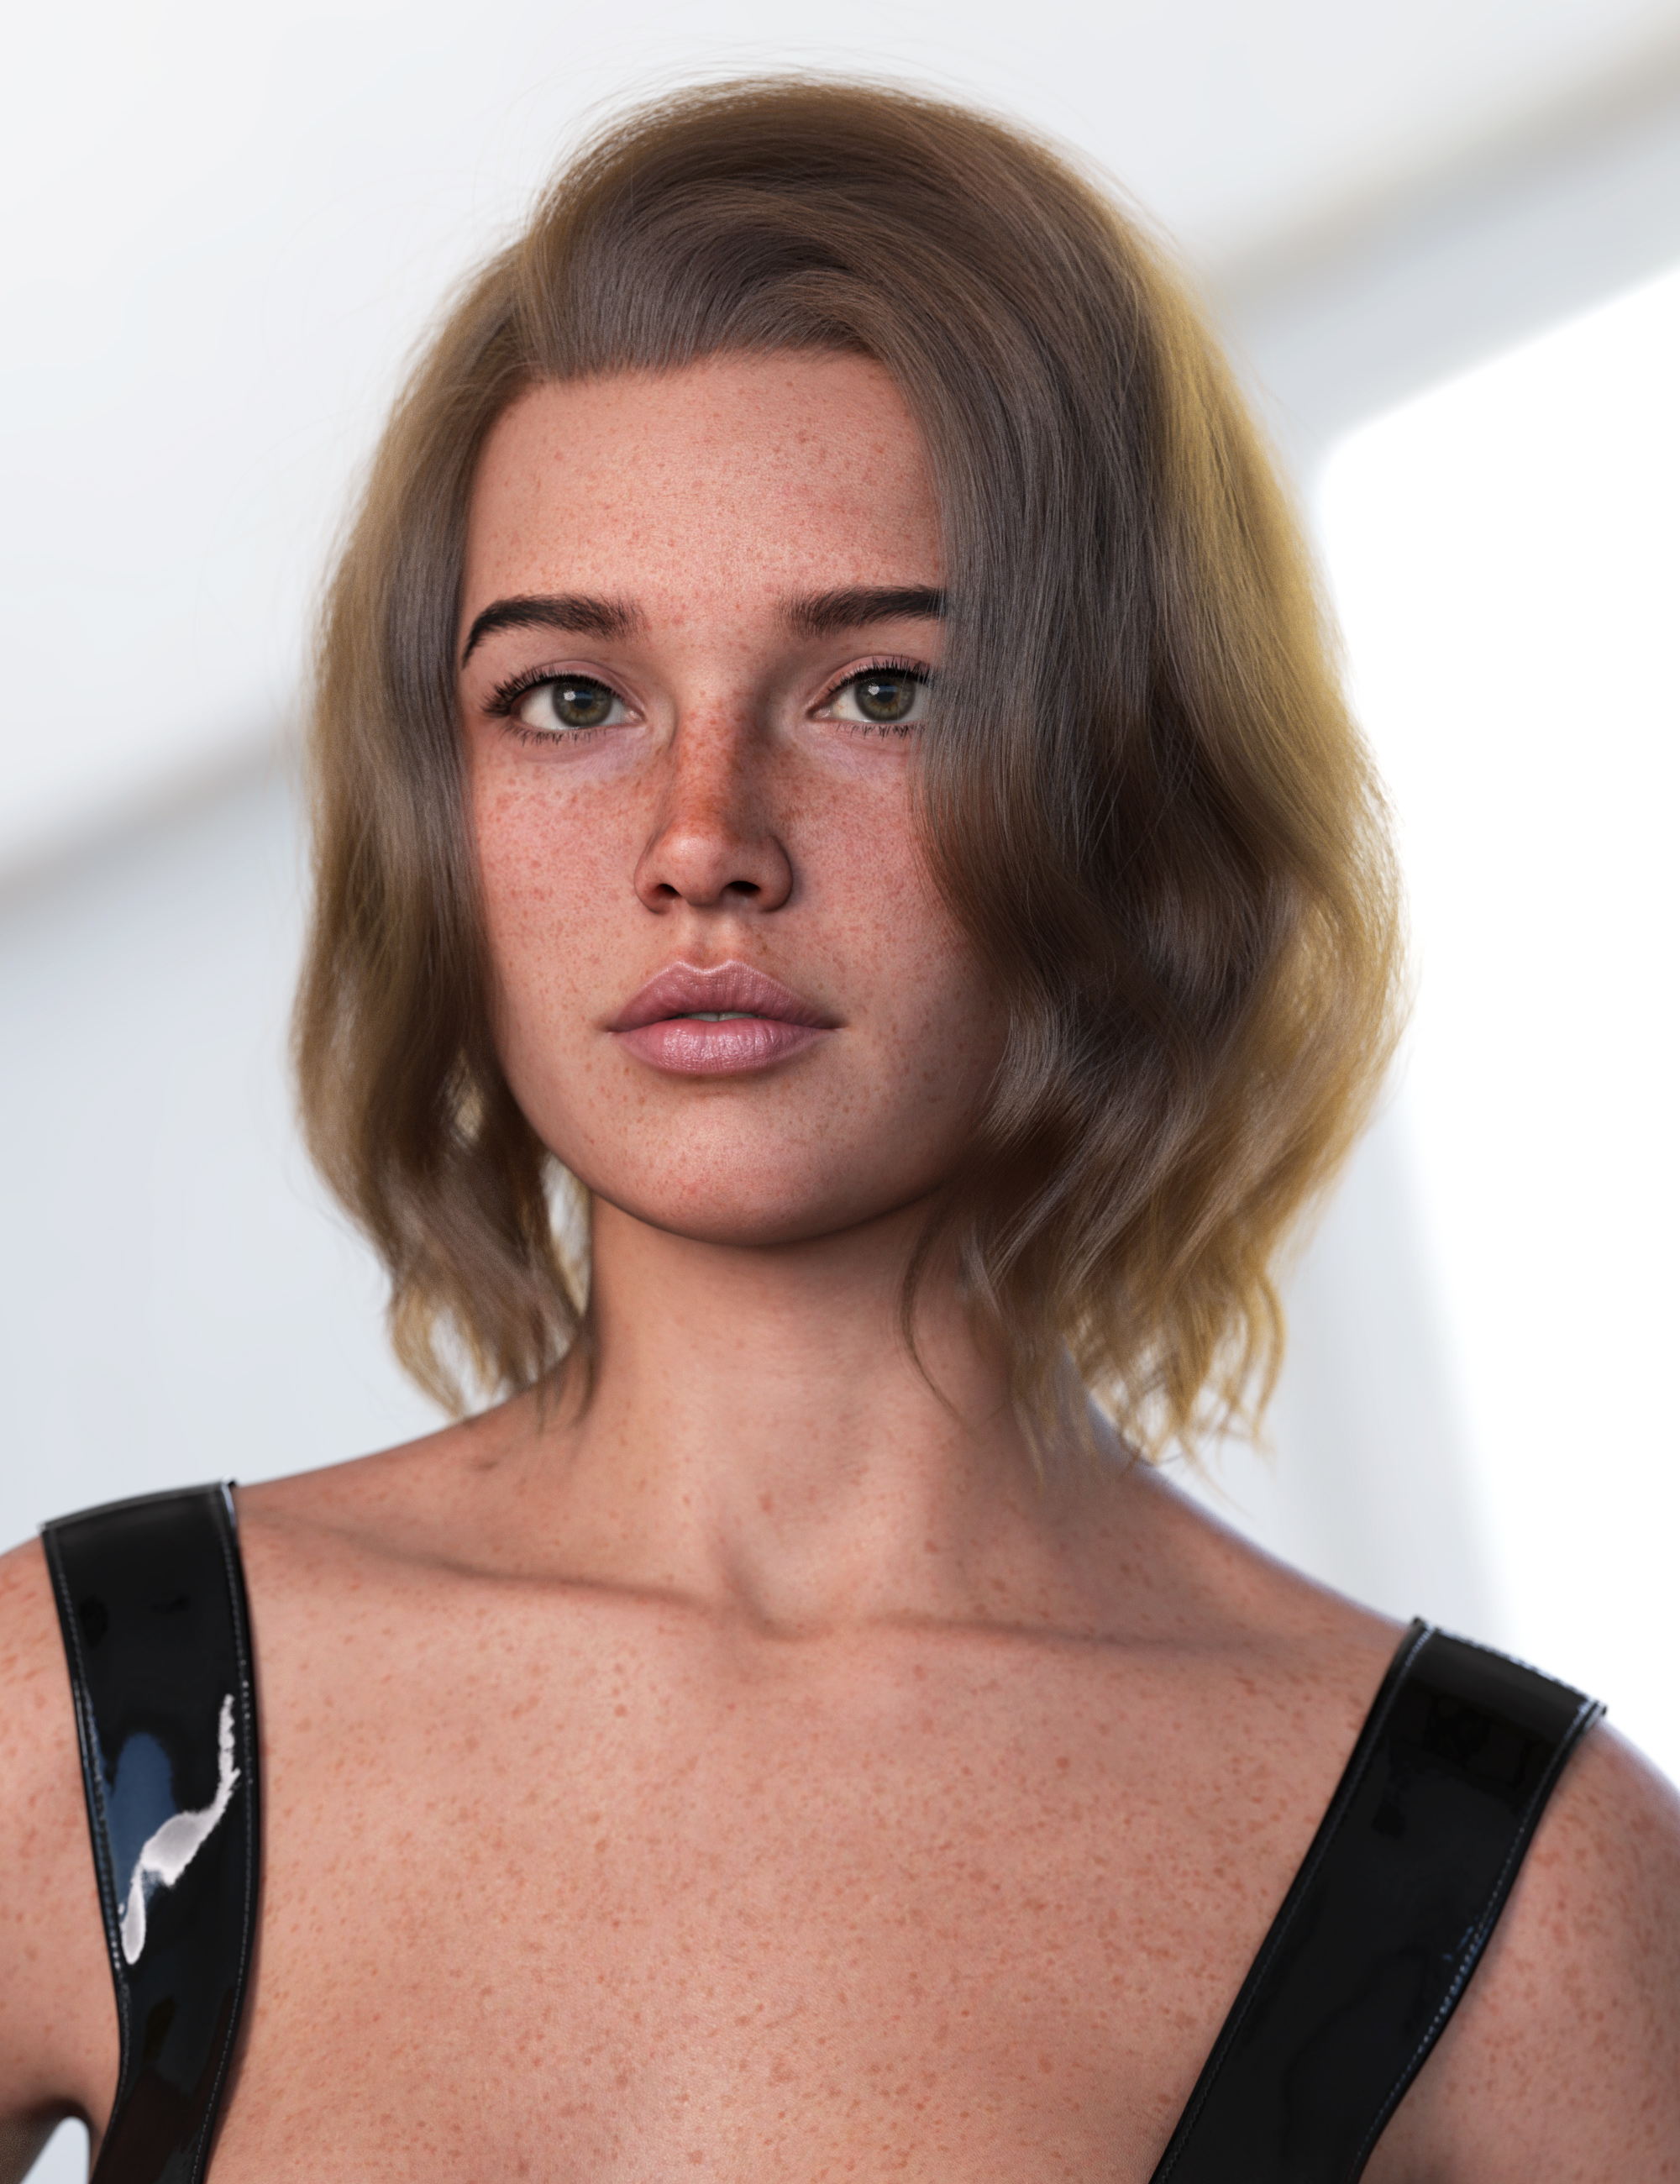 dForce Strand-Based Top Wave Long Bob Hair for Genesis 9 by: outoftouch, 3D Models by Daz 3D